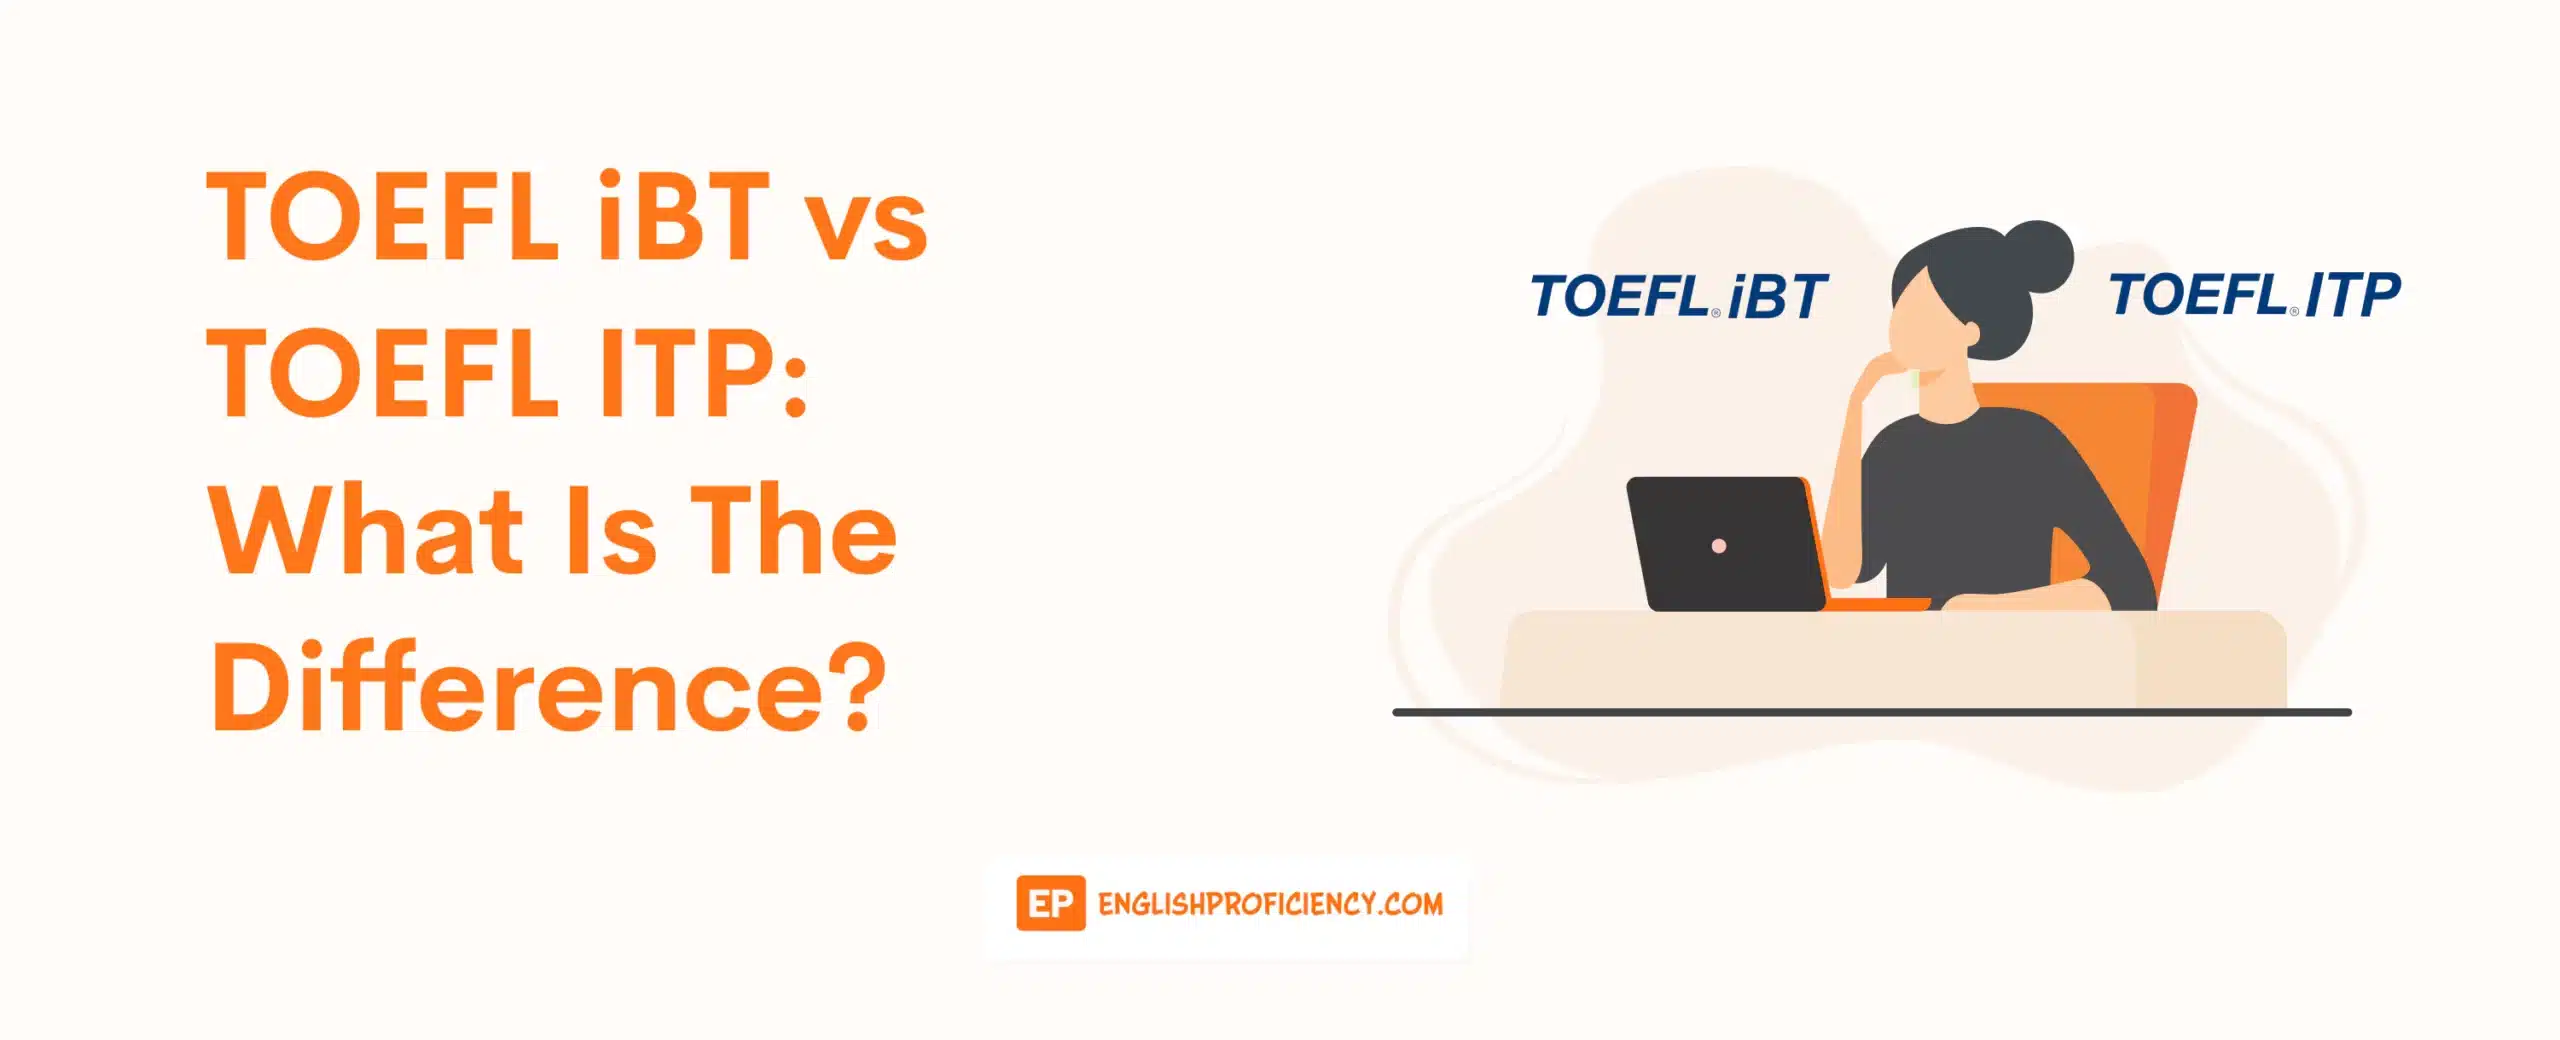 TOEFL iBT vs. TOEFL ITP What Is The Difference